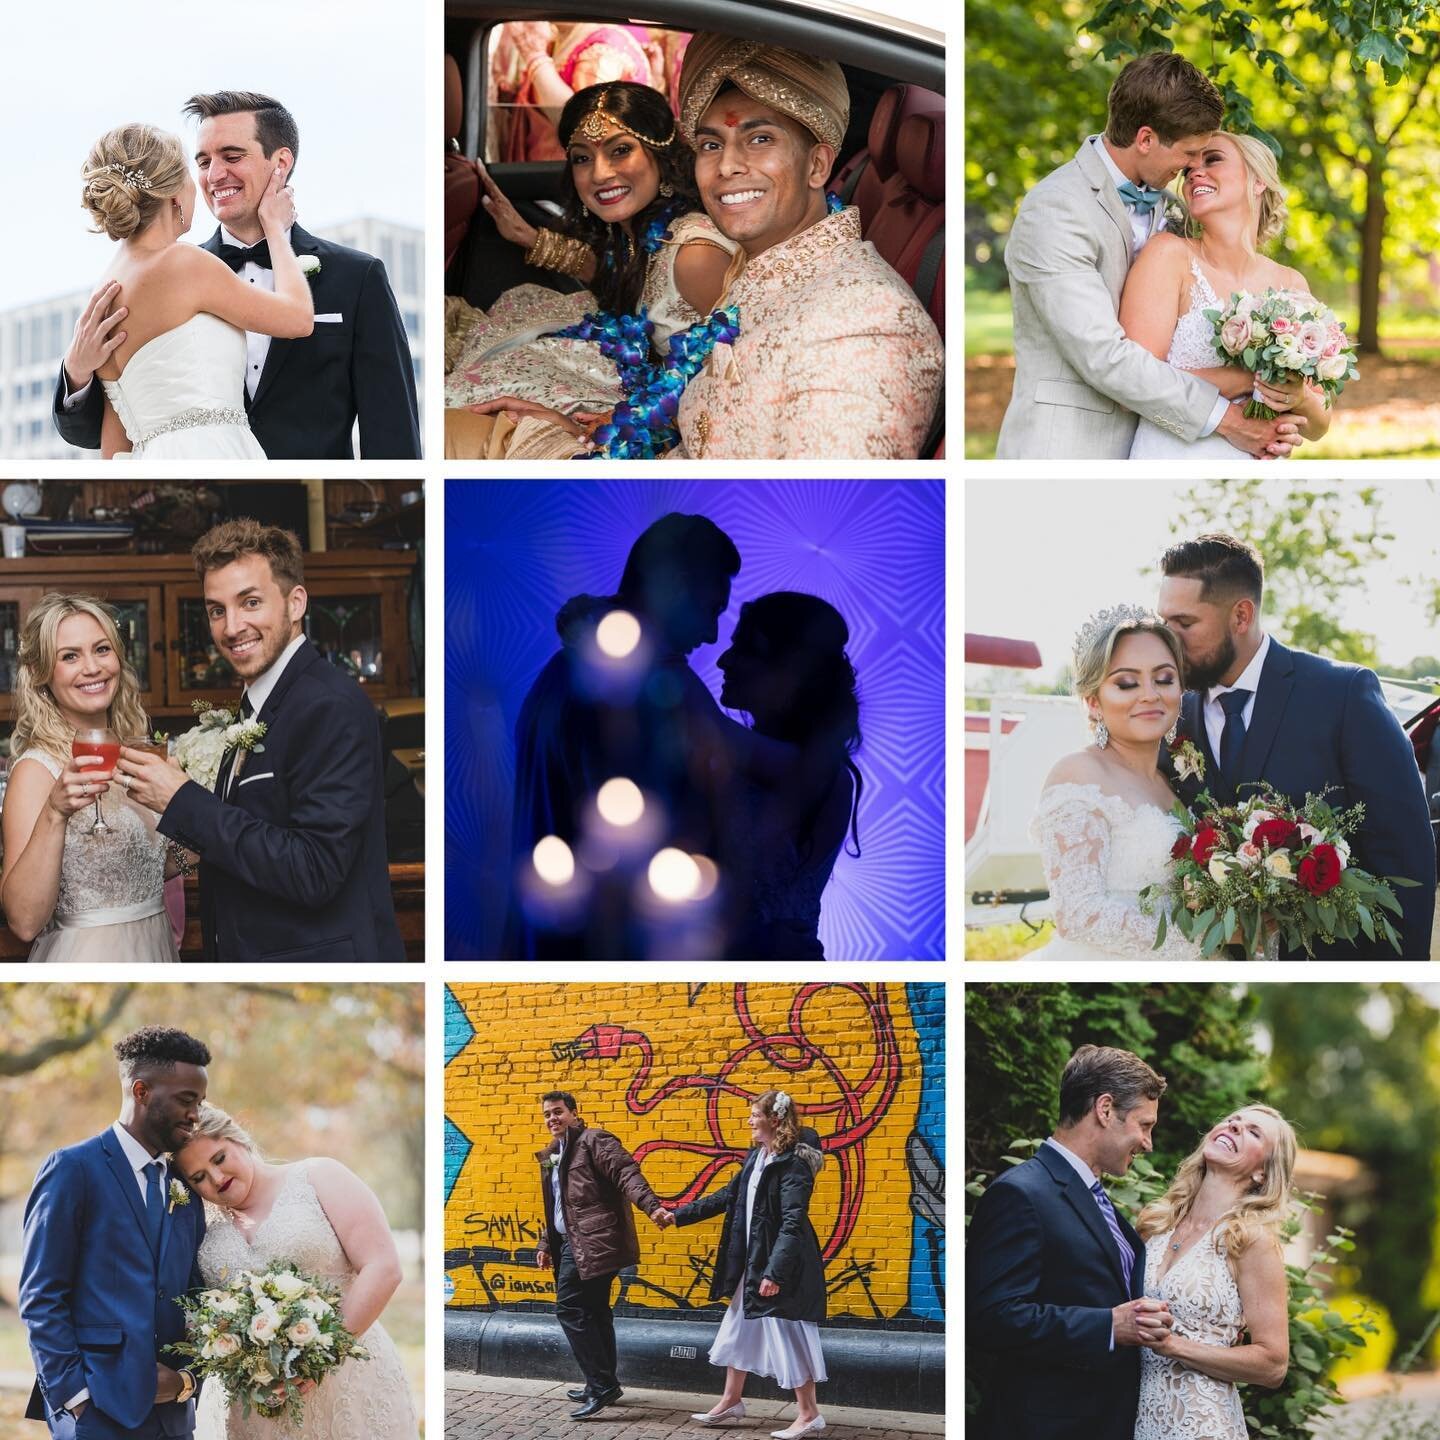 Huge Thank you to all of our 2019 couples. We could only include 9 but each of you is special to us. #creativemweddings #weddingseason #loveauthentic #ftwotw #chicagocouples #theknot #chicagoelopementphotographer #brideandgroom #smpweddings #shesaidy